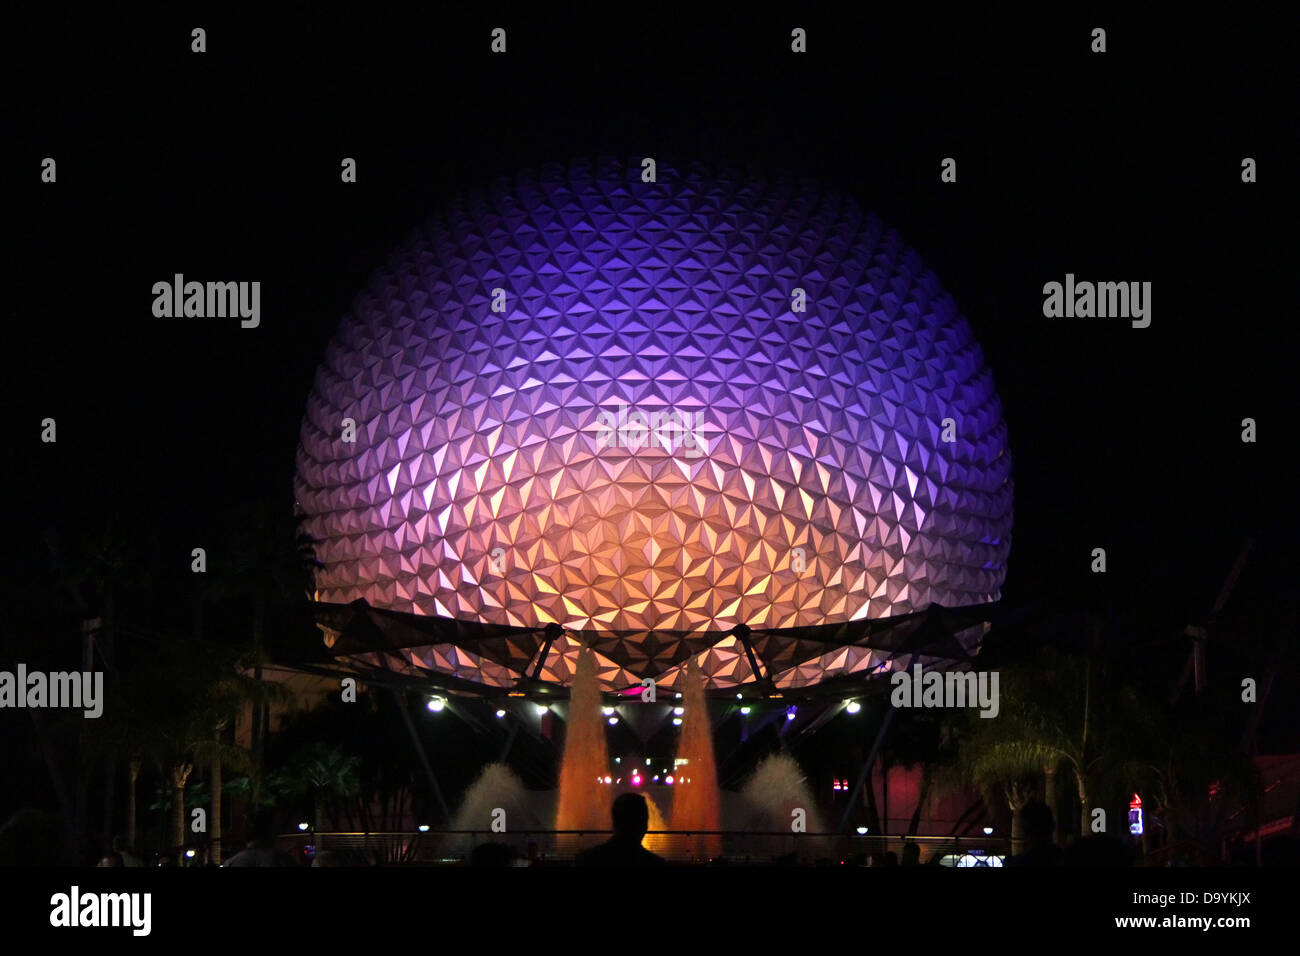 EPCOT Center at Walt Disney World, night view. Spaceship Earth at night. FOR EDITORIAL USE ONLY. Stock Photo